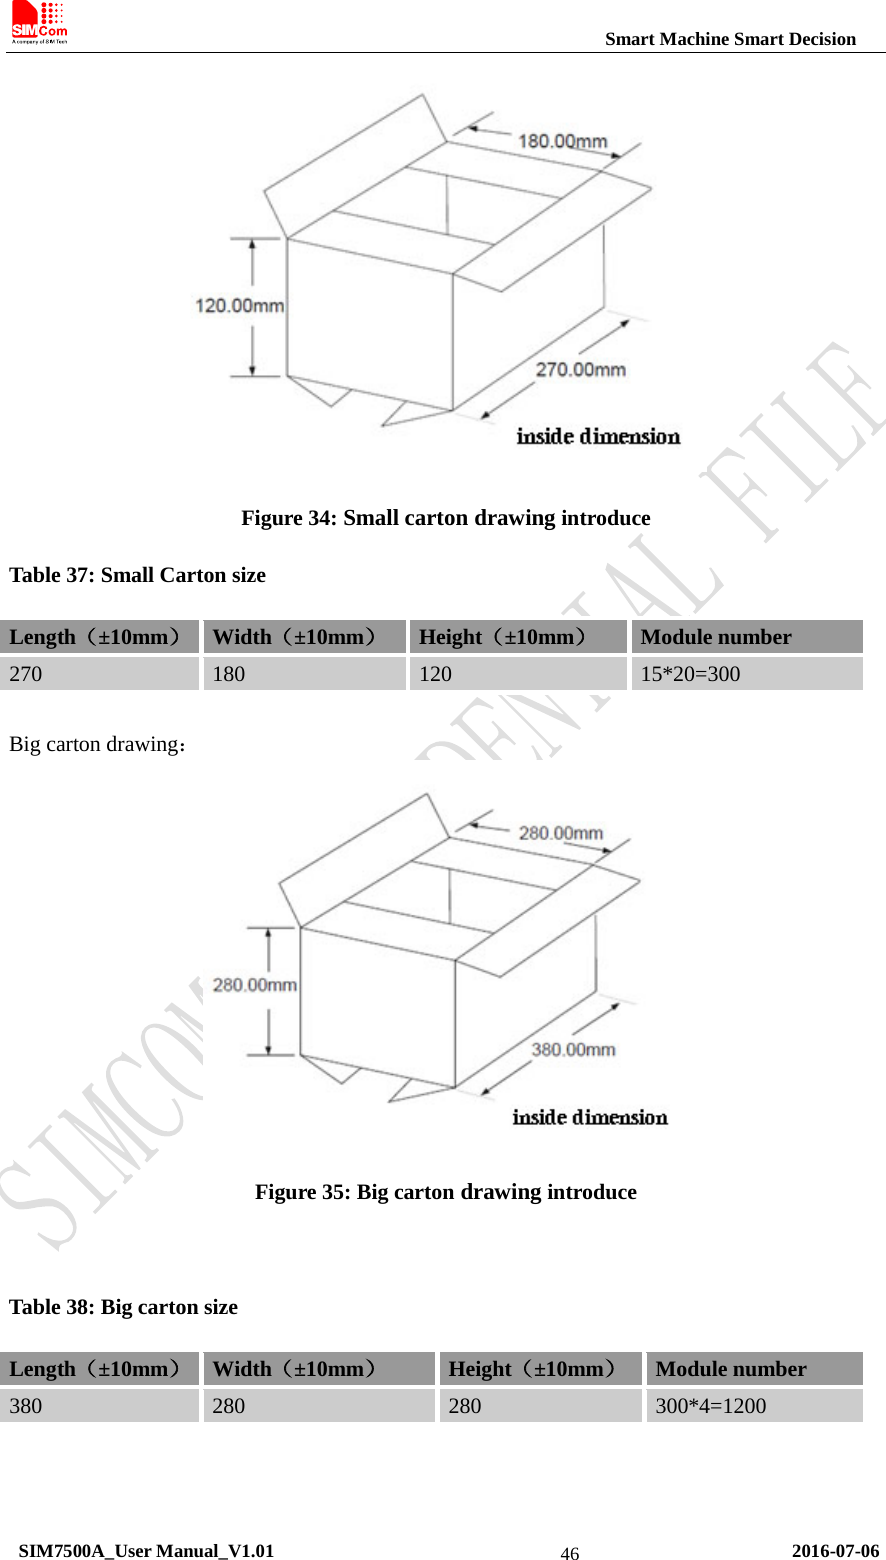                                                          Smart Machine Smart Decision  Figure 34: Small carton drawing introduce Table 37: Small Carton size Length（±10mm） Width（±10mm） Height（±10mm） Module number 270 180 120 15*20=300  Big carton drawing：  Figure 35: Big carton drawing introduce  Table 38: Big carton size Length（±10mm） Width（±10mm） Height（±10mm） Module number 380  280  280  300*4=1200    SIM7500A_User Manual_V1.01                                                       2016-07-06 46 